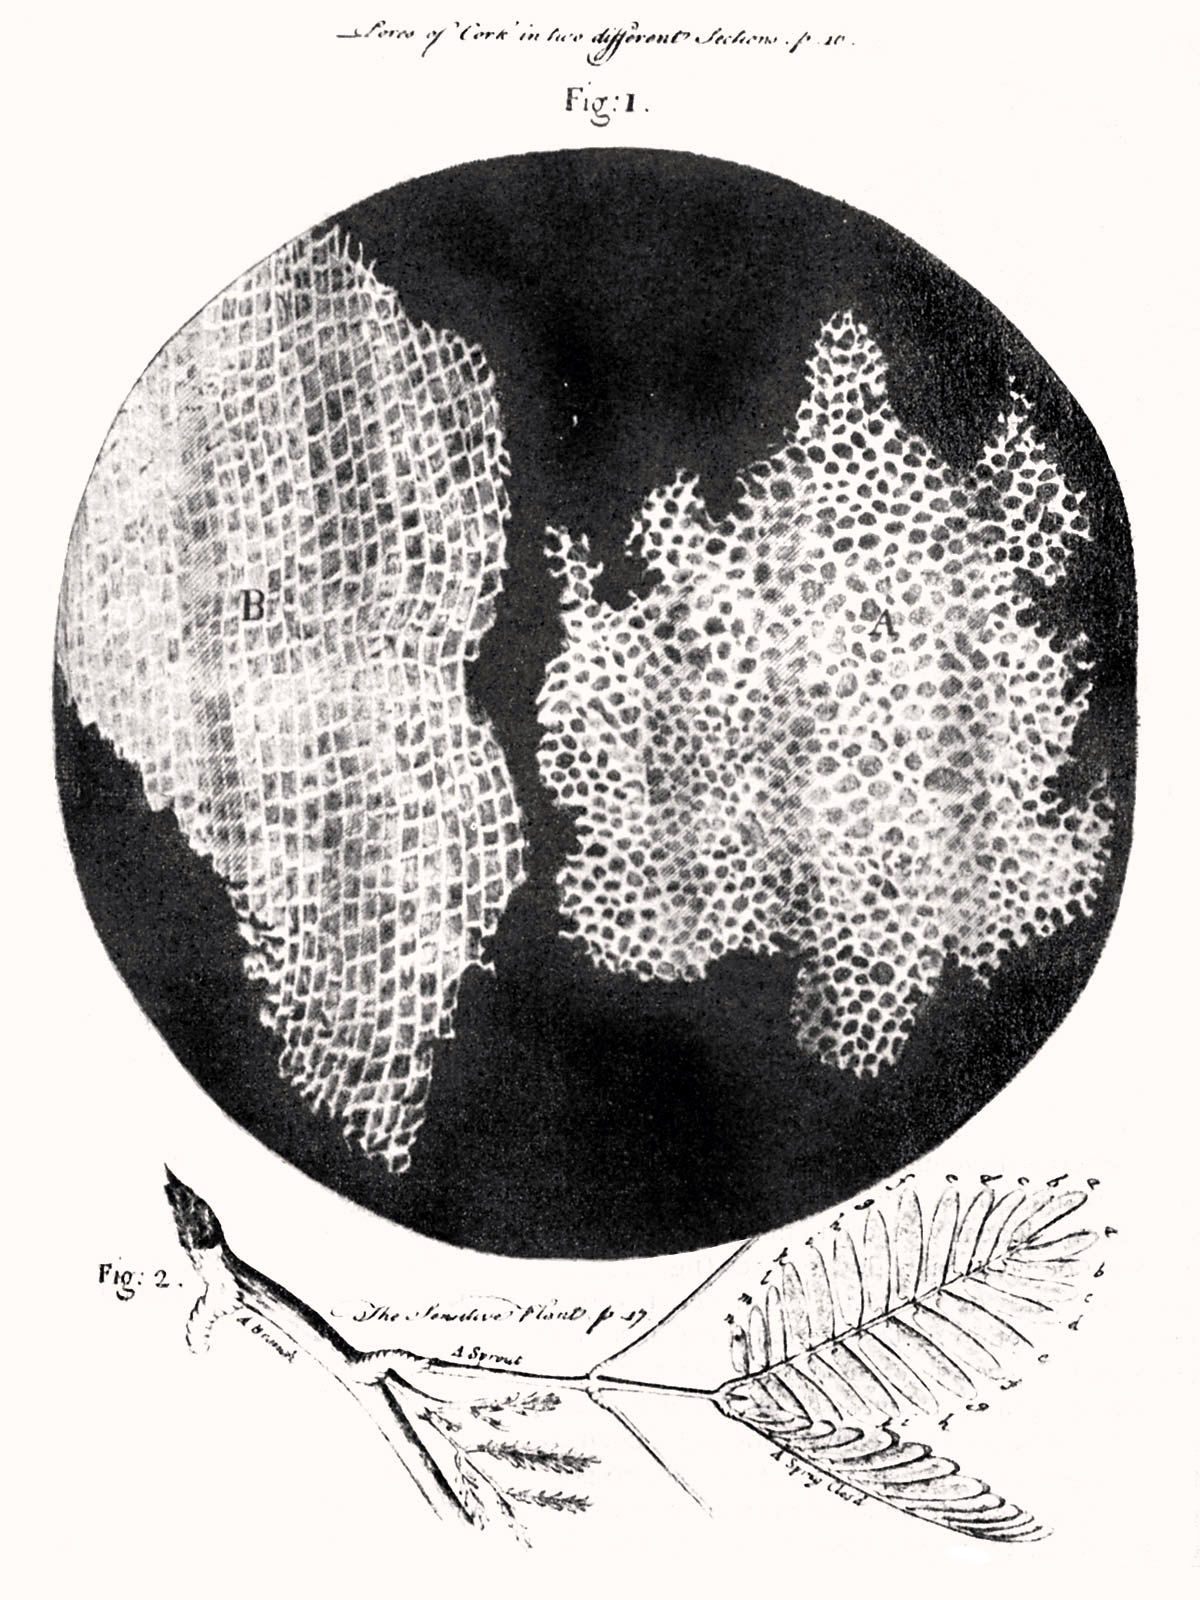 Hooke was the first to apply the word “cell”to biological objects. Cell structure of cork by Hooke.